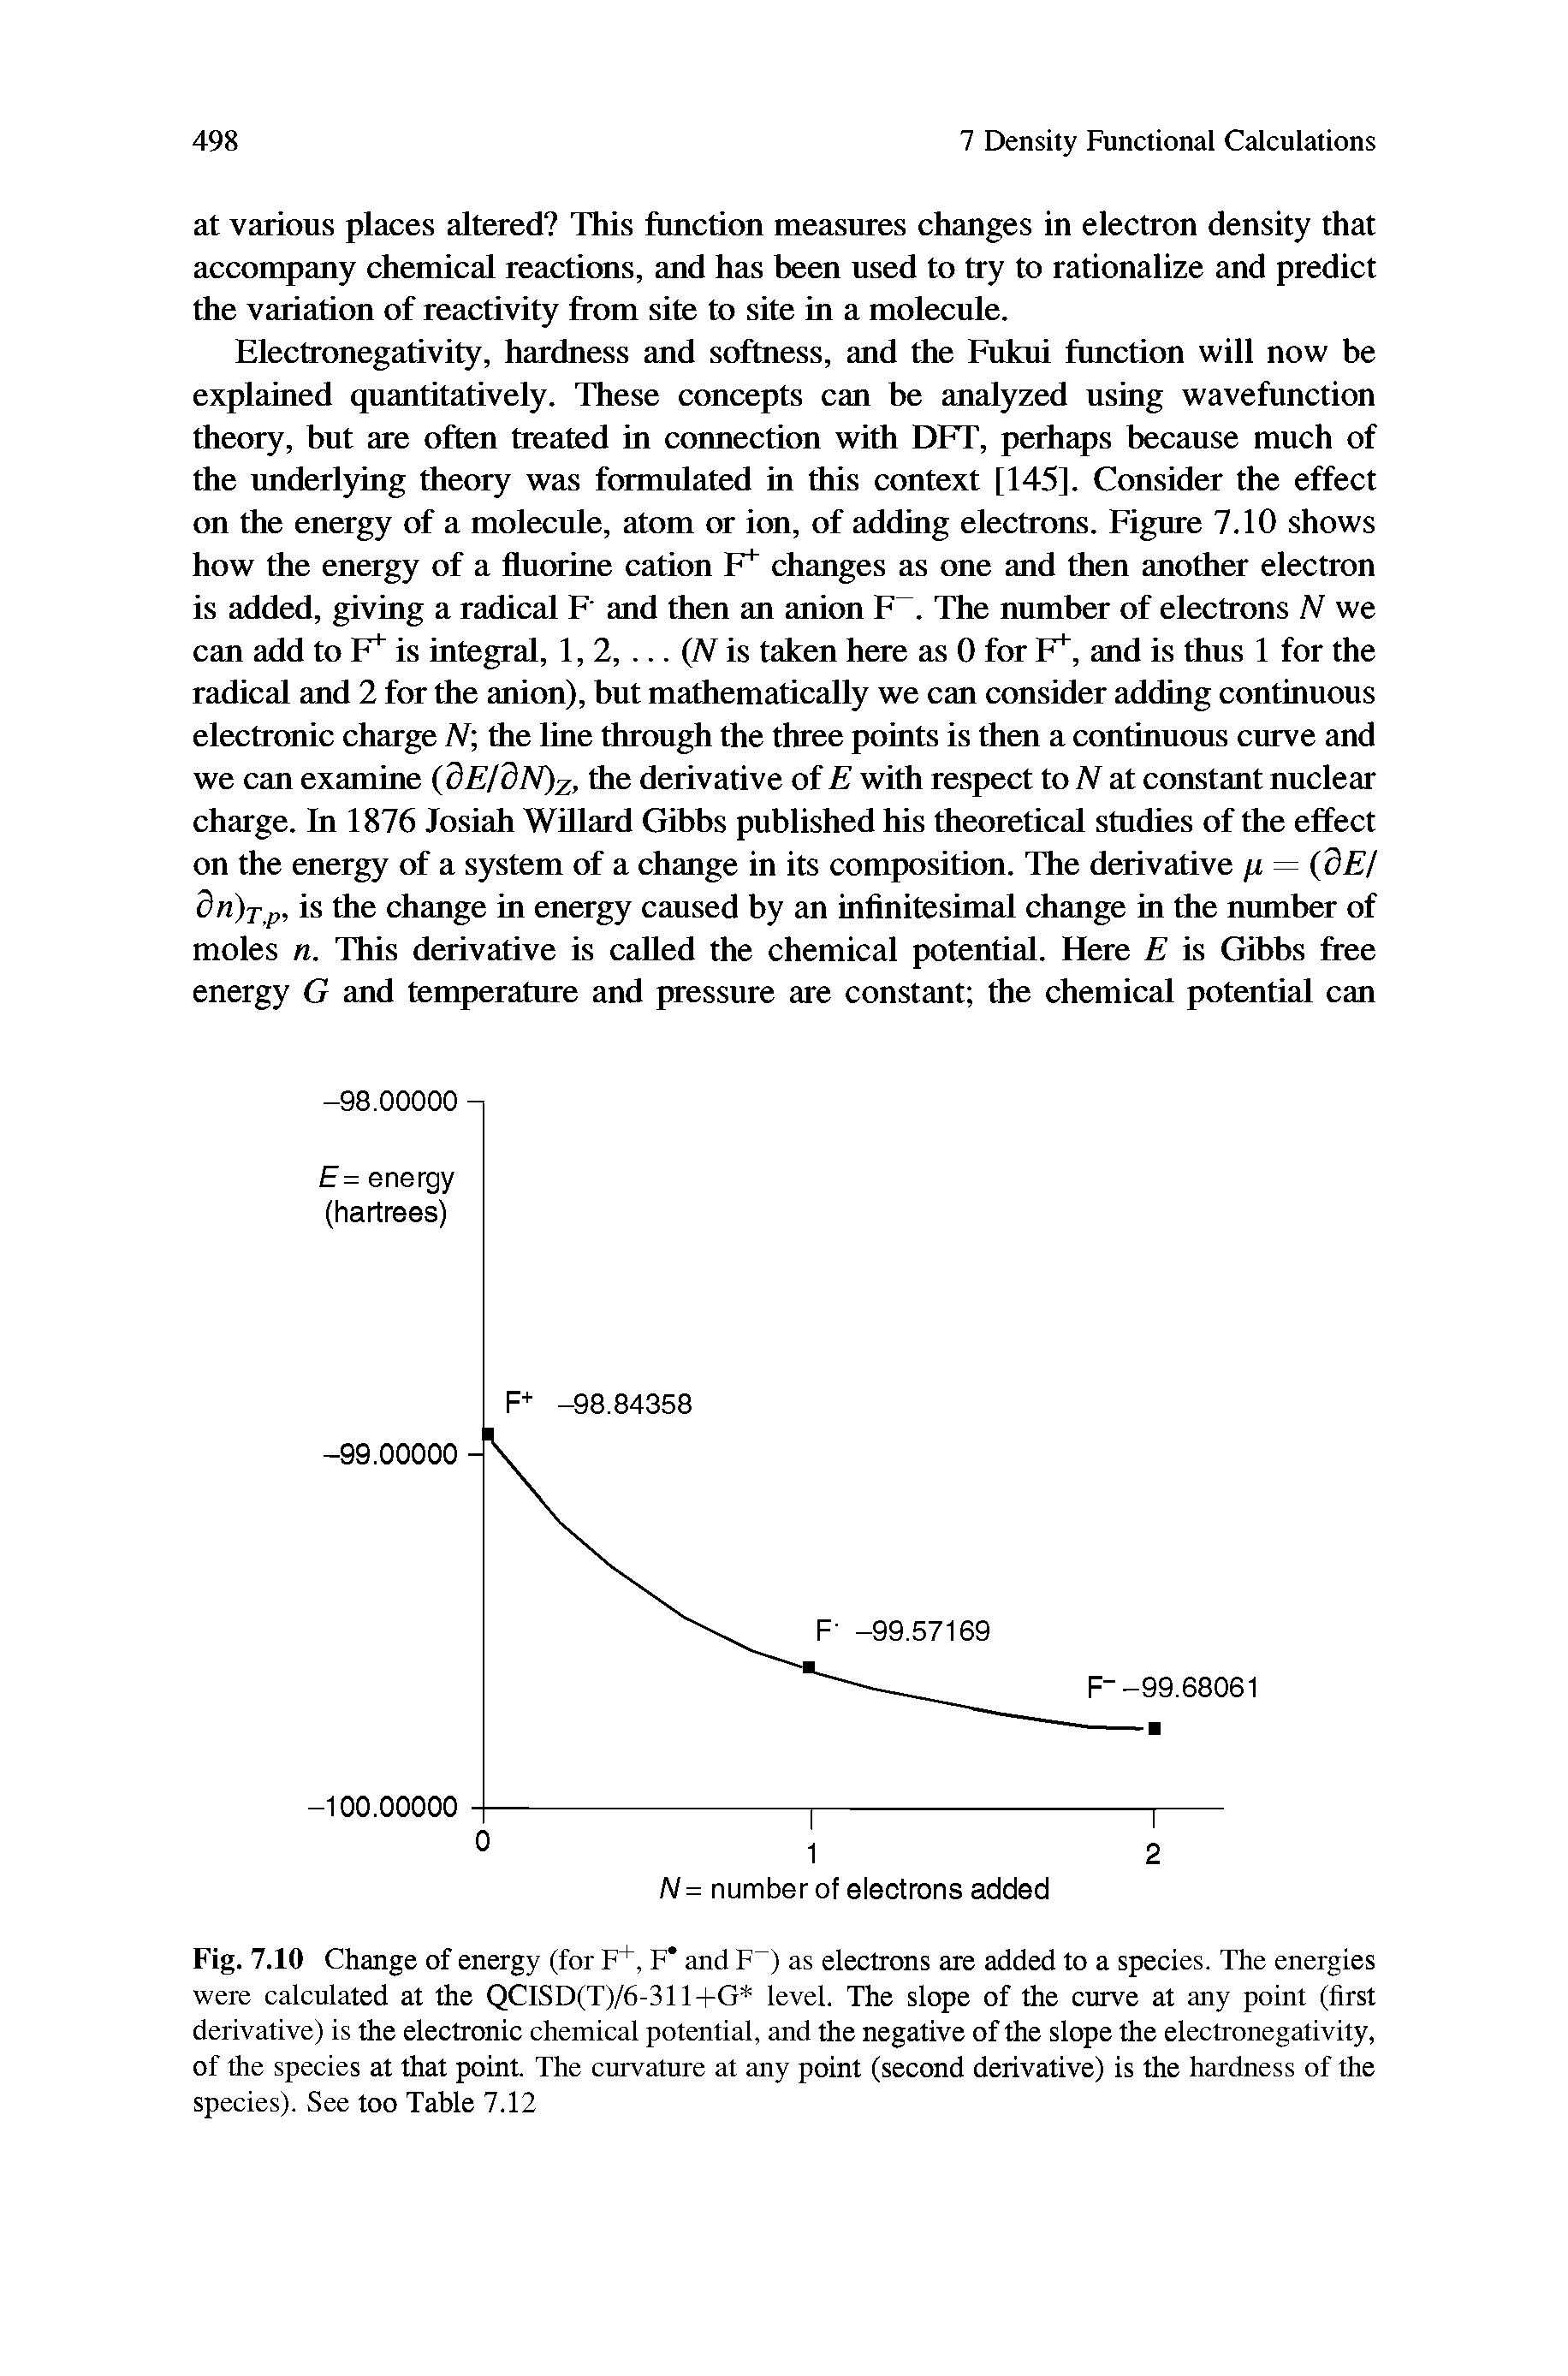 Fig. 7.10 Change of energy (for F+, F and F ) as electrons are added to a species. The energies were calculated at the QCISD(T)/6-311+G level. The slope of the curve at any point (first derivative) is the electronic chemical potential, and the negative of the slope the electronegativity, of the species at that point. The curvature at any point (second derivative) is the hardness of the species). See too Table 7.12...